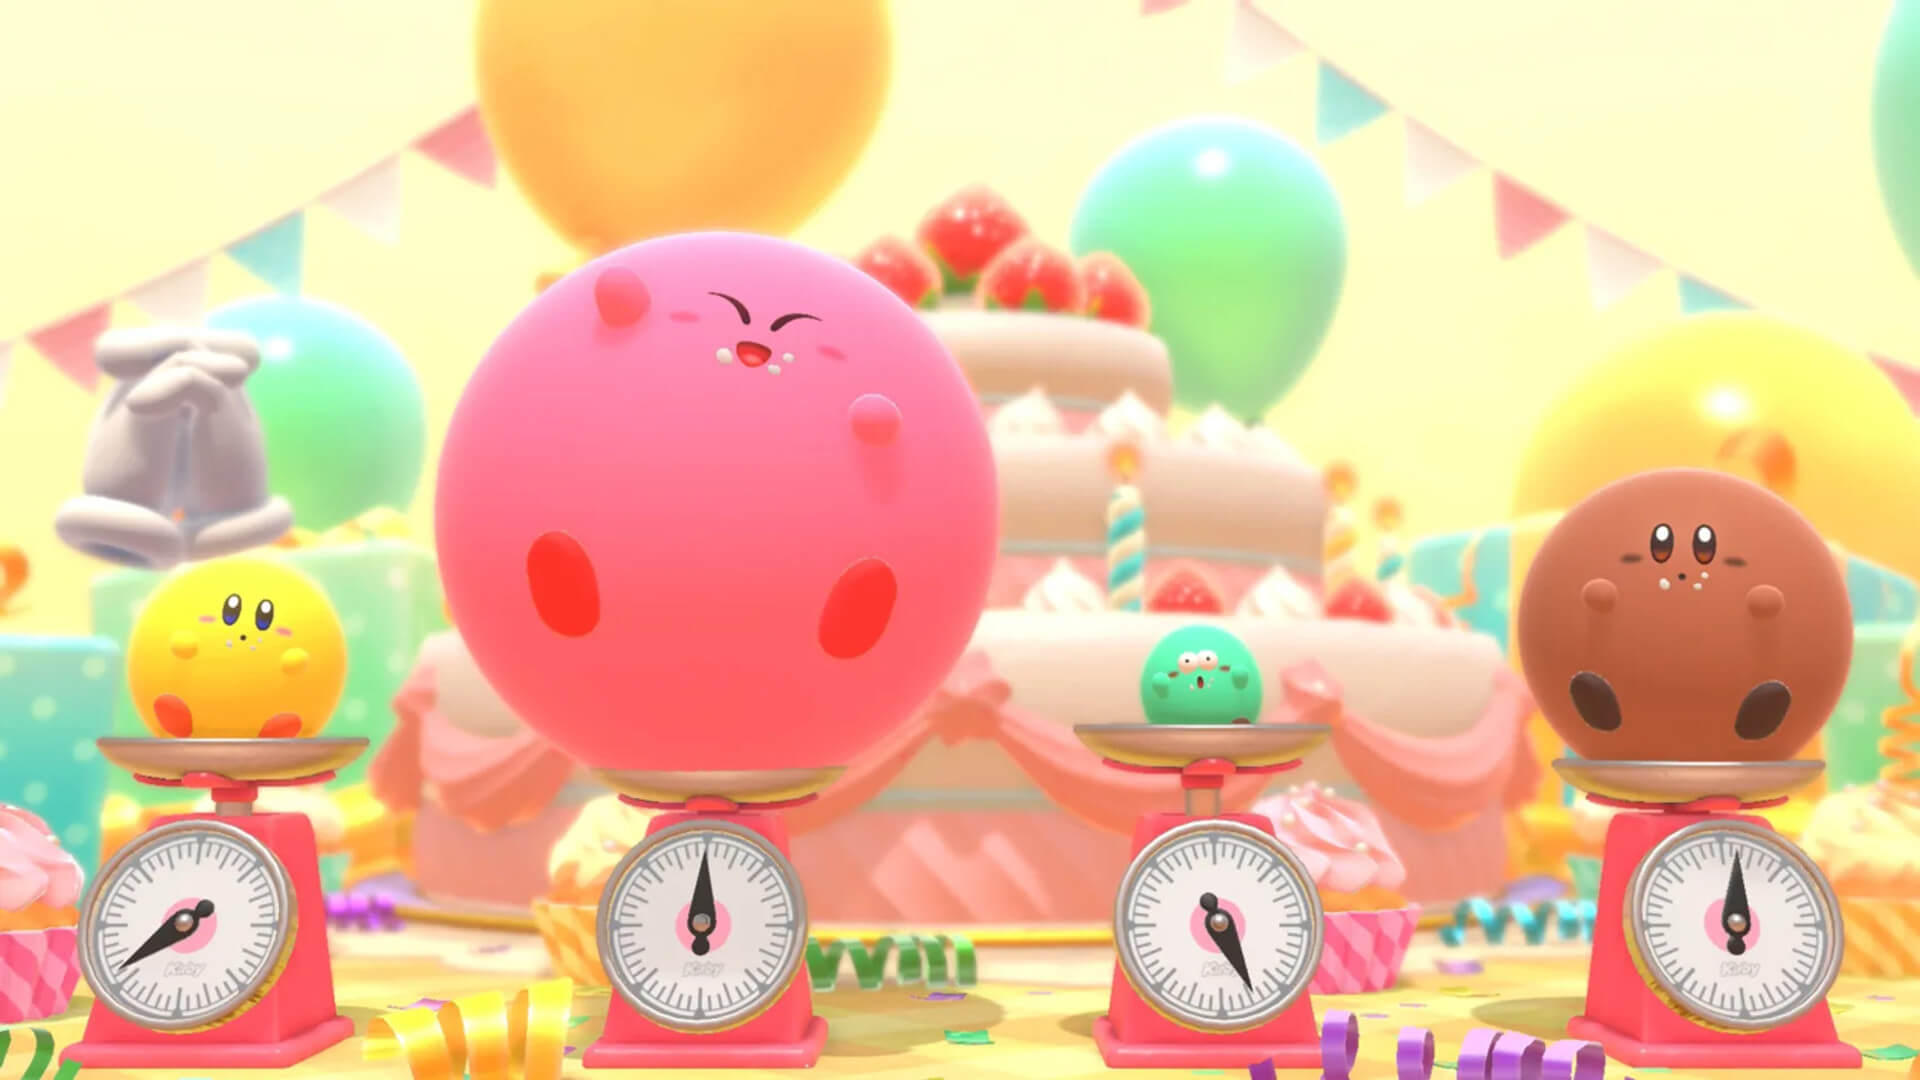 Kirby on a scale, weighing in after inhaling all the snacks in Kirby's Dream Buffet, 